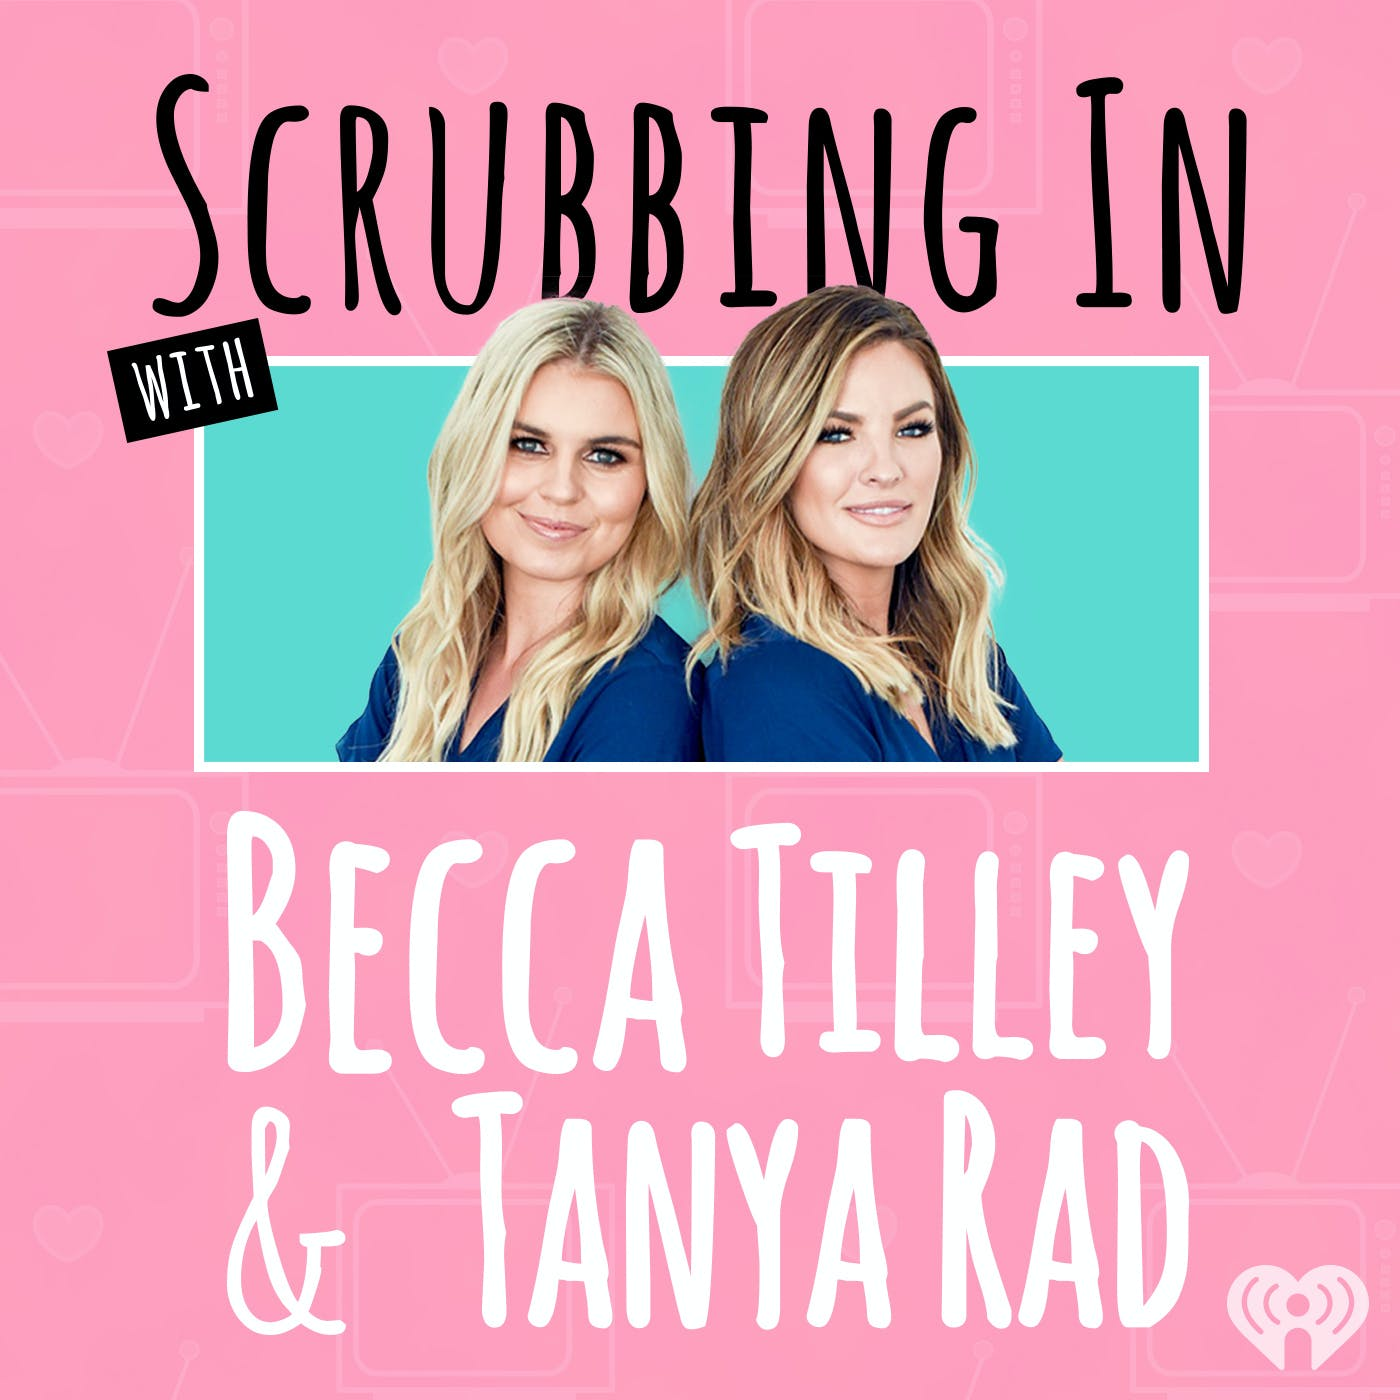 Scrubbing In with Becca Tilley Teaser 2